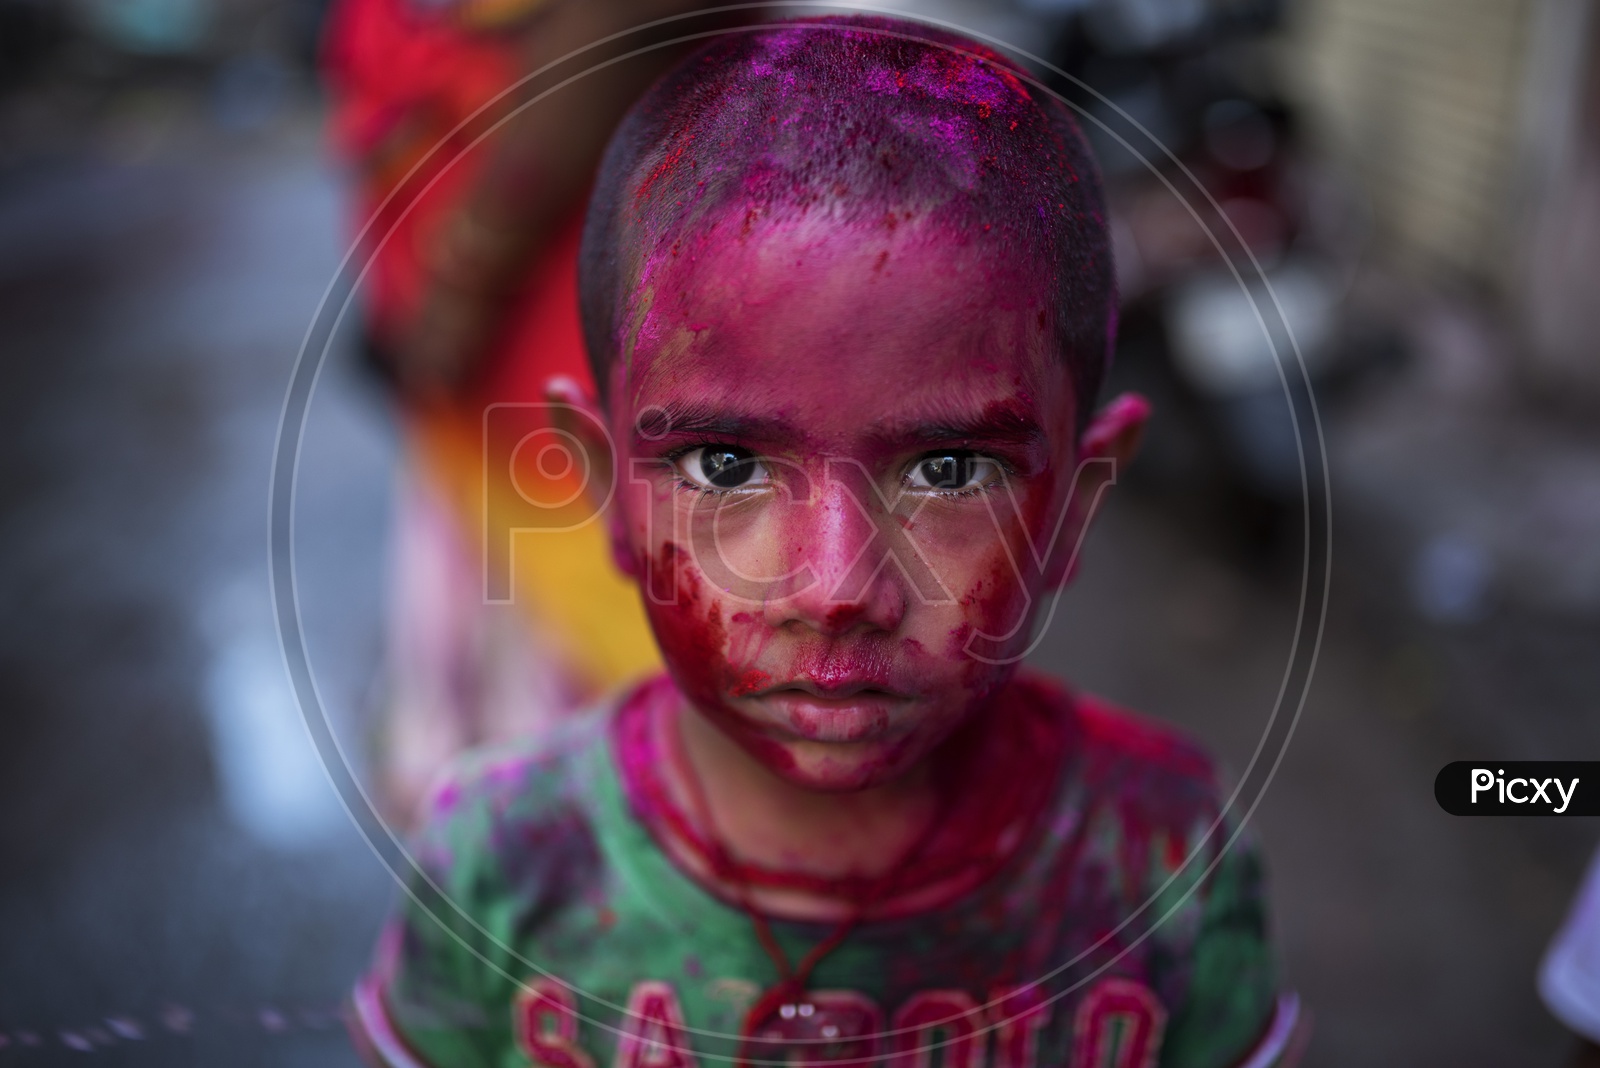 Kid with Colors on his face - Holi Celebrations - Indian Festival - Colors/Colorful